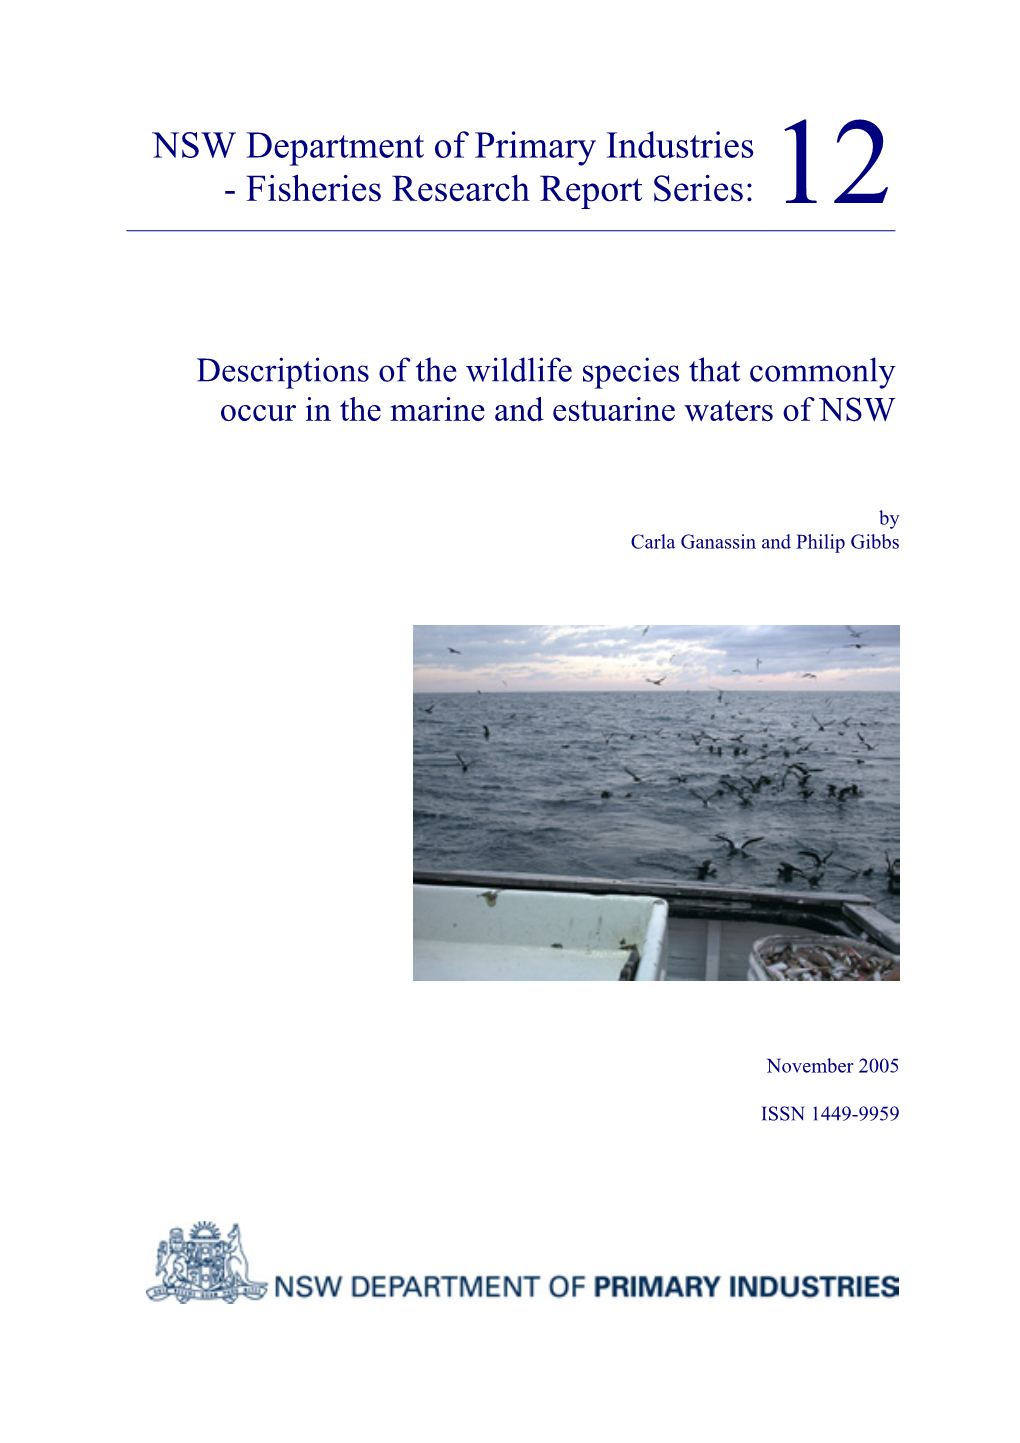 Descriptions of the Wildlife Species That Commonly Occur in the Marine and Estuarine Waters of NSW